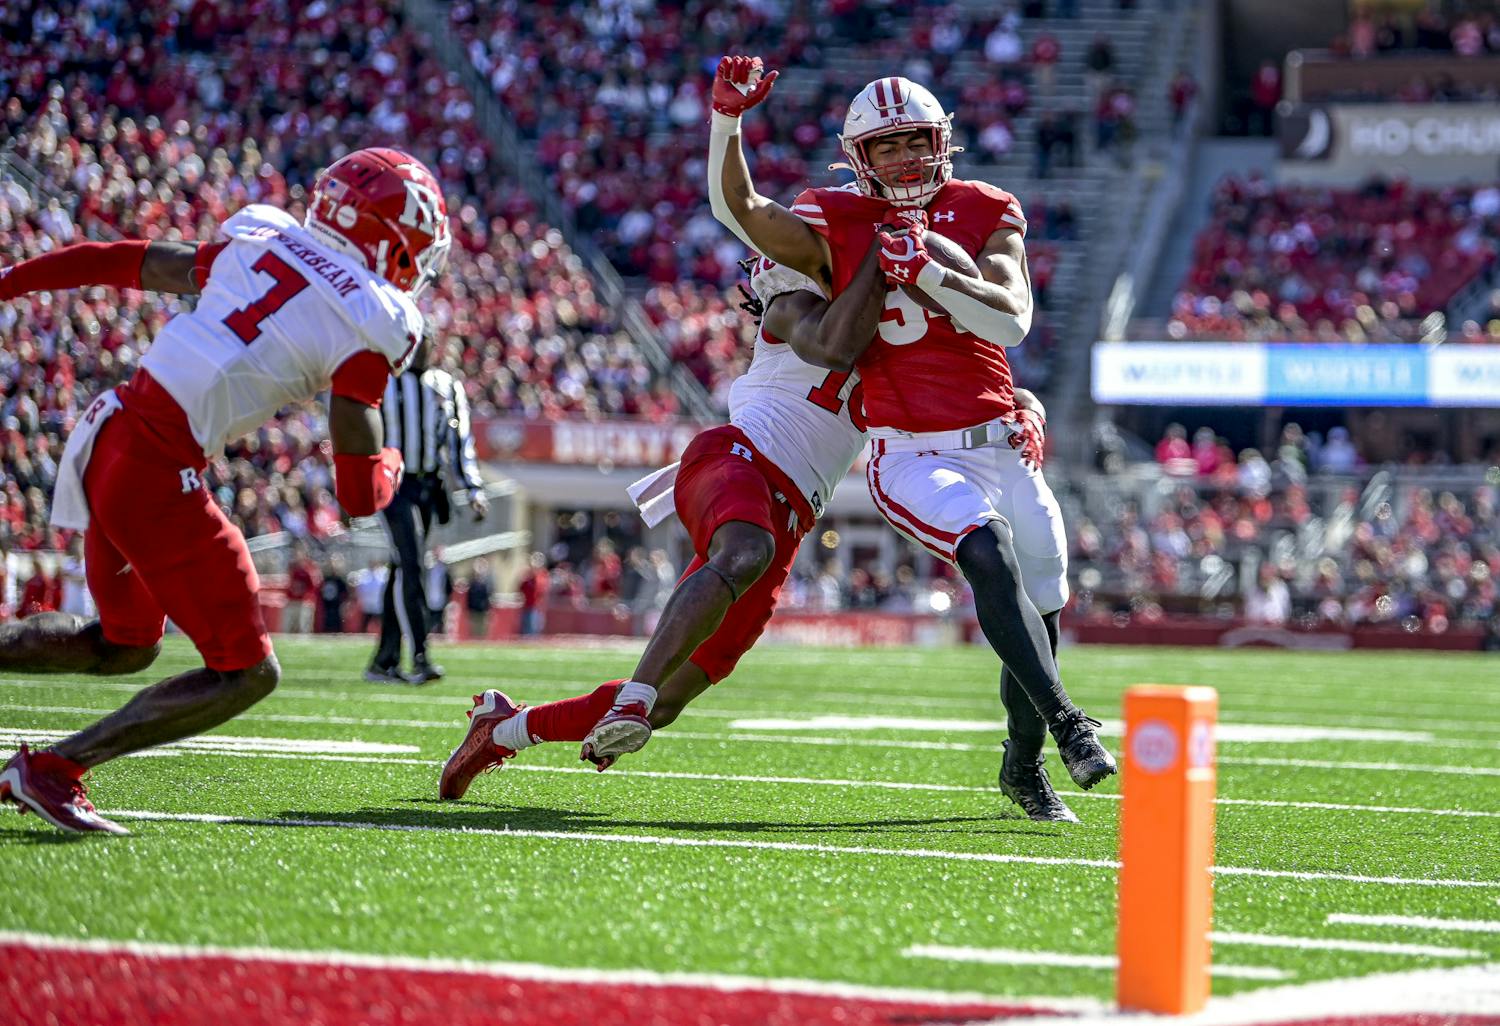 PHOTOS: Wisconsin Football celebrates a Homecoming Weekend win against Rutgers 24-13